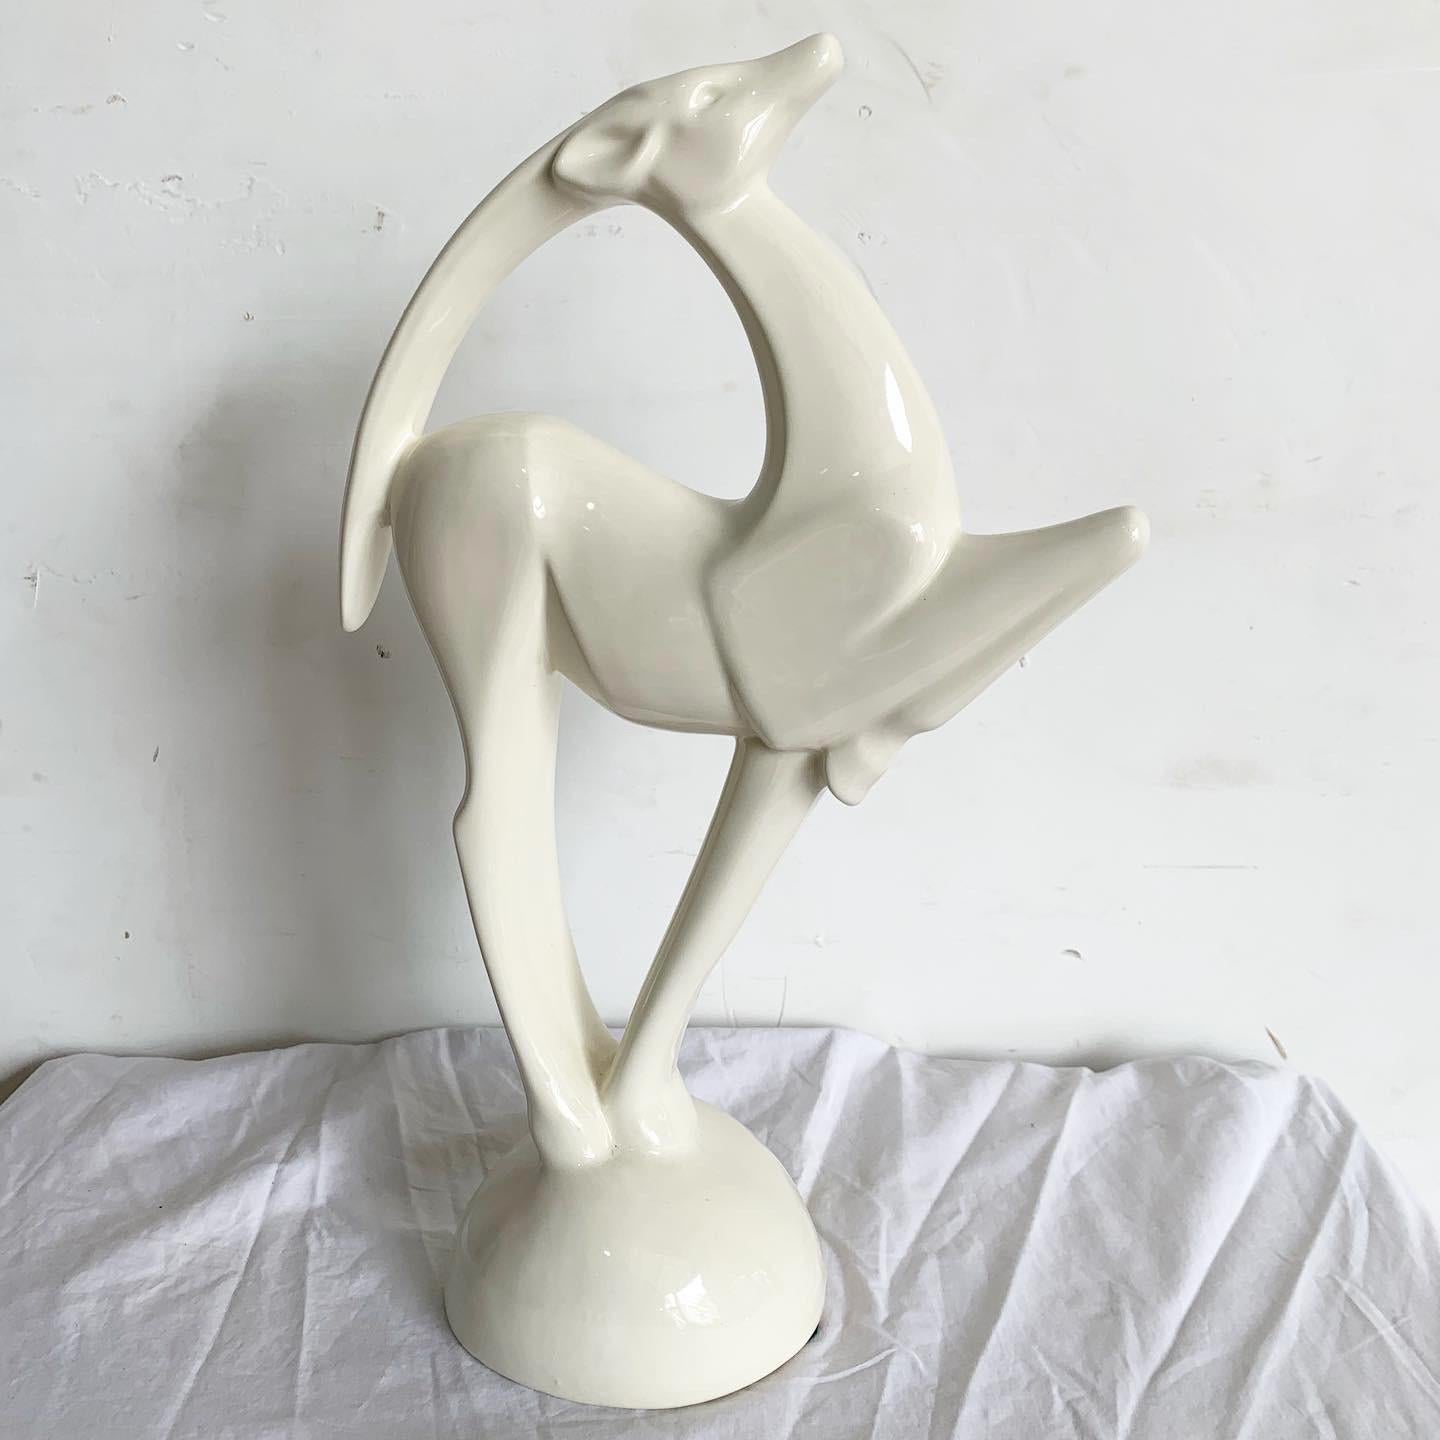 Introducing the Haeger White Ibex Sculpture, a perfect fusion of timeless elegance and modern design. Cast in pristine white ceramic, this postmodern piece captures the Ibex's majesty through sleek lines and stylized detailing. Haeger's commitment